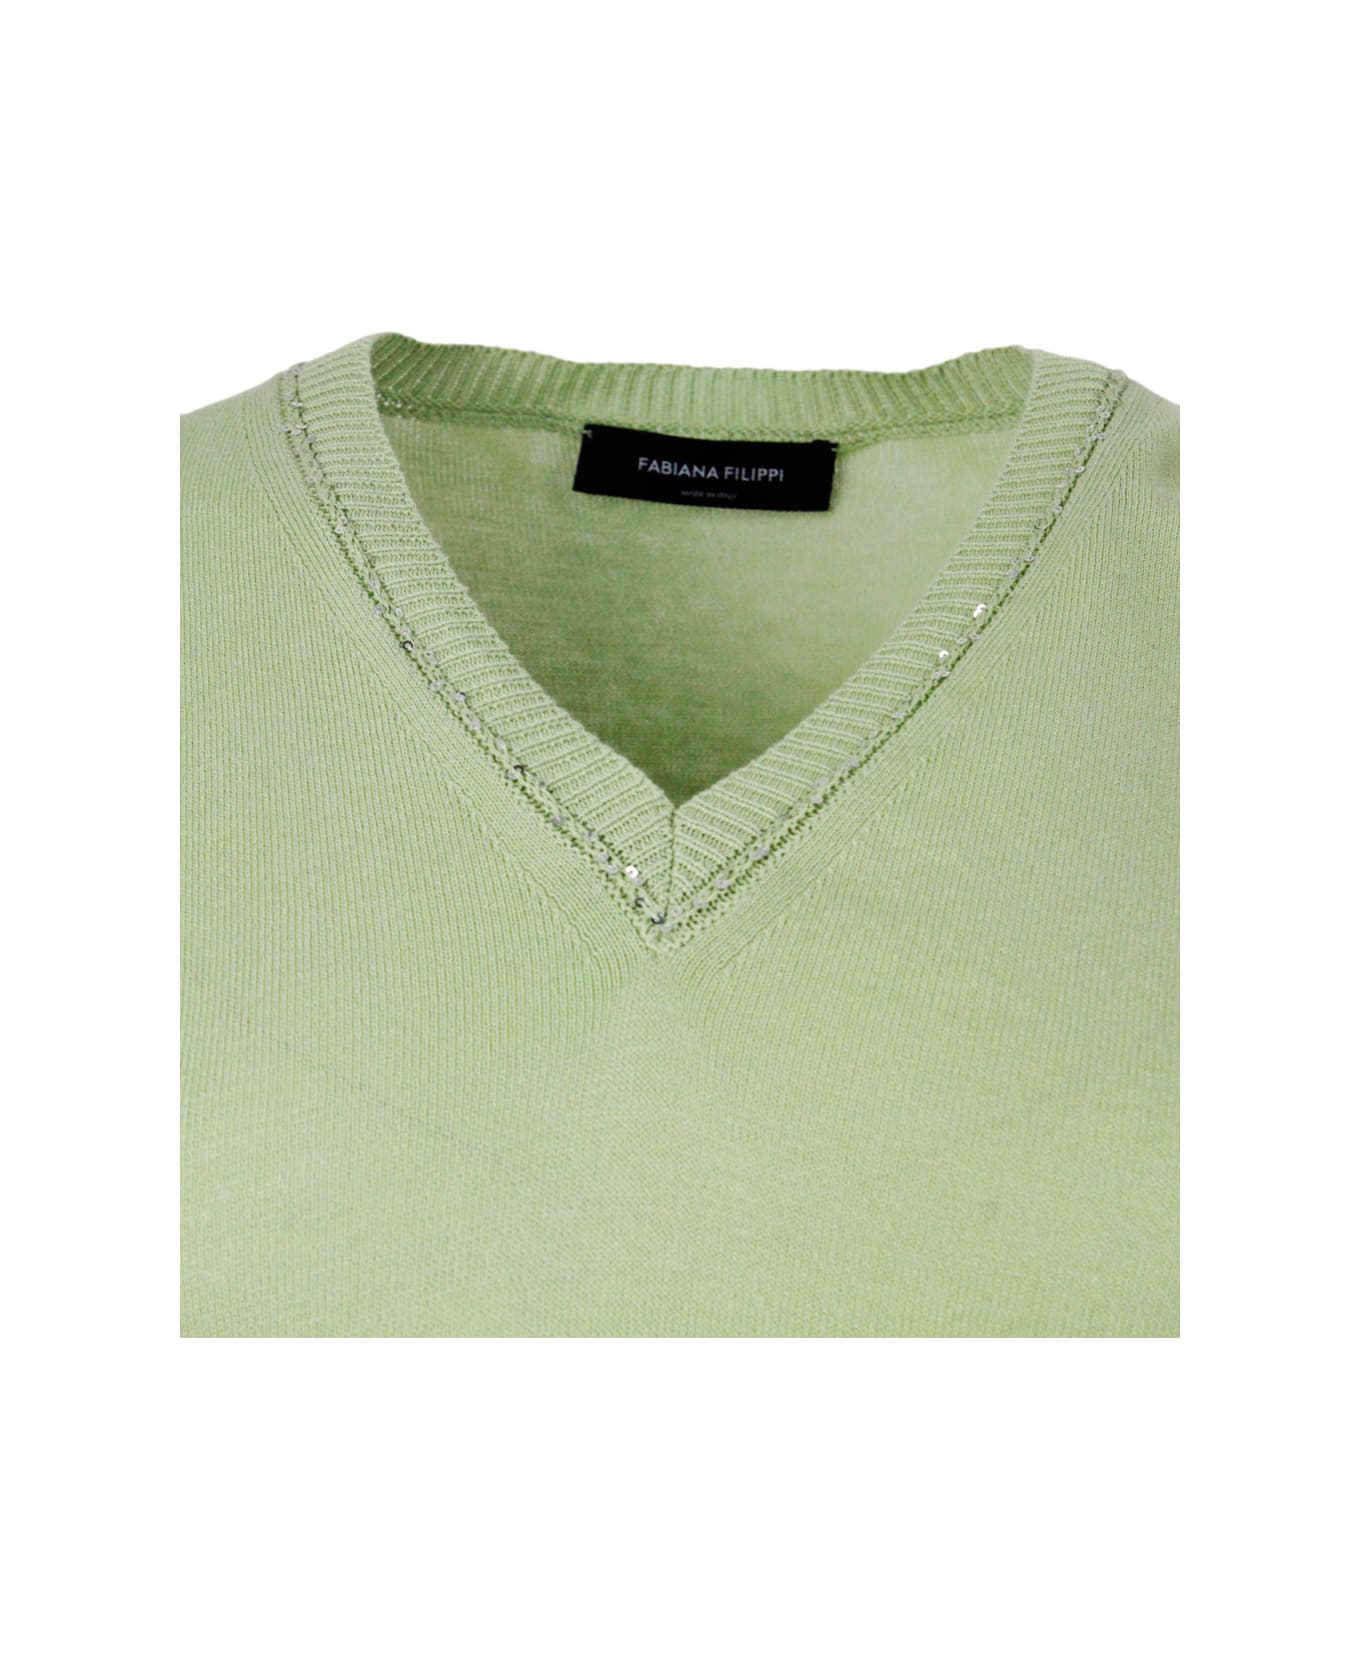 Fabiana Filippi Sleeveless V-neck Sweater In Lightweight Cotton Embellished With Brilliant Applied Micro Sequins - Green